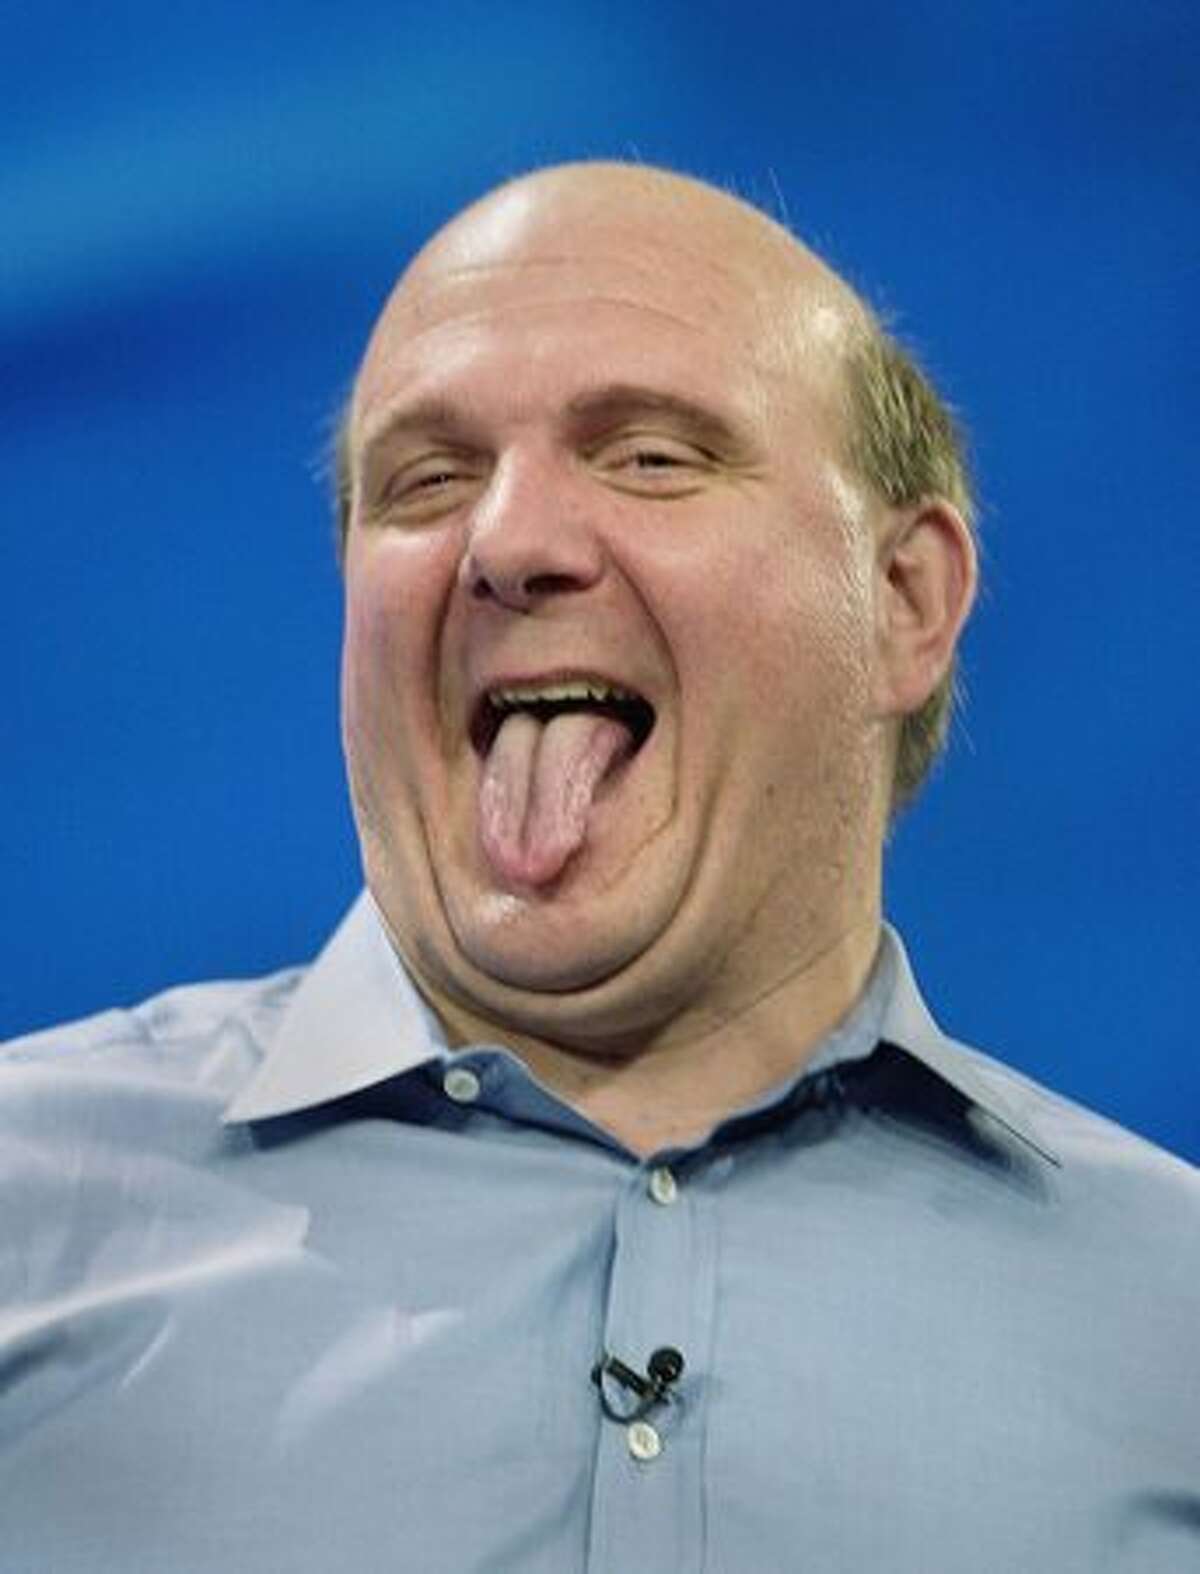 This famous photo of Ballmer was taken Oct. 18, 2000, during the Mastermind Keynote Interview at the Gartner Symposium/ITxpo at the Walt Disney Dolphin Resort in Orlando, Fla.